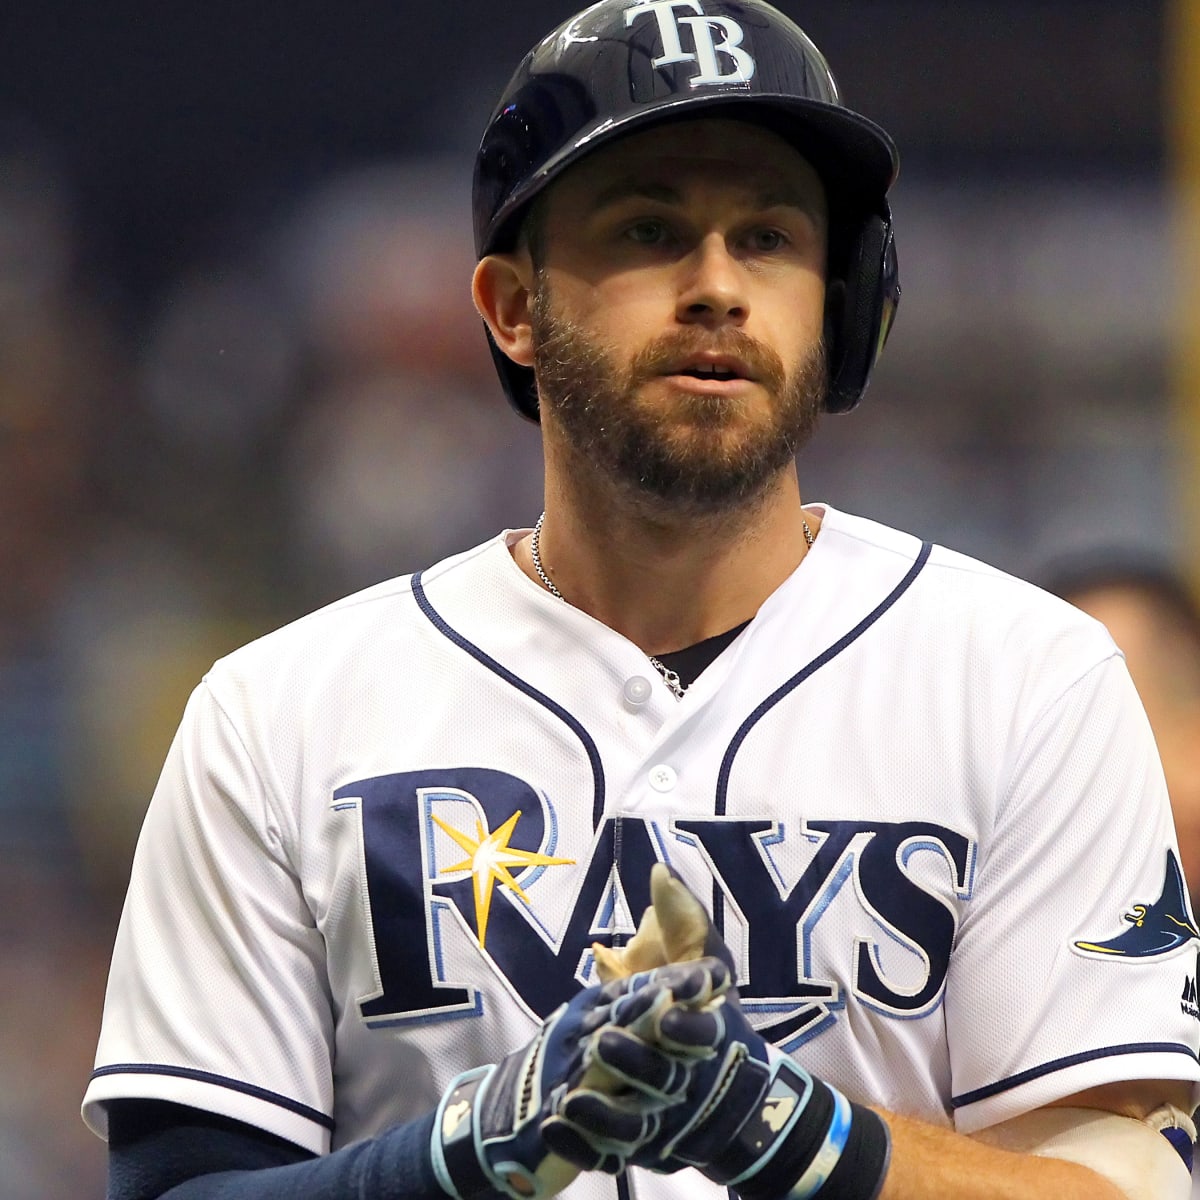 Evan Longoria hits for second cycle in Rays history - Sports Illustrated